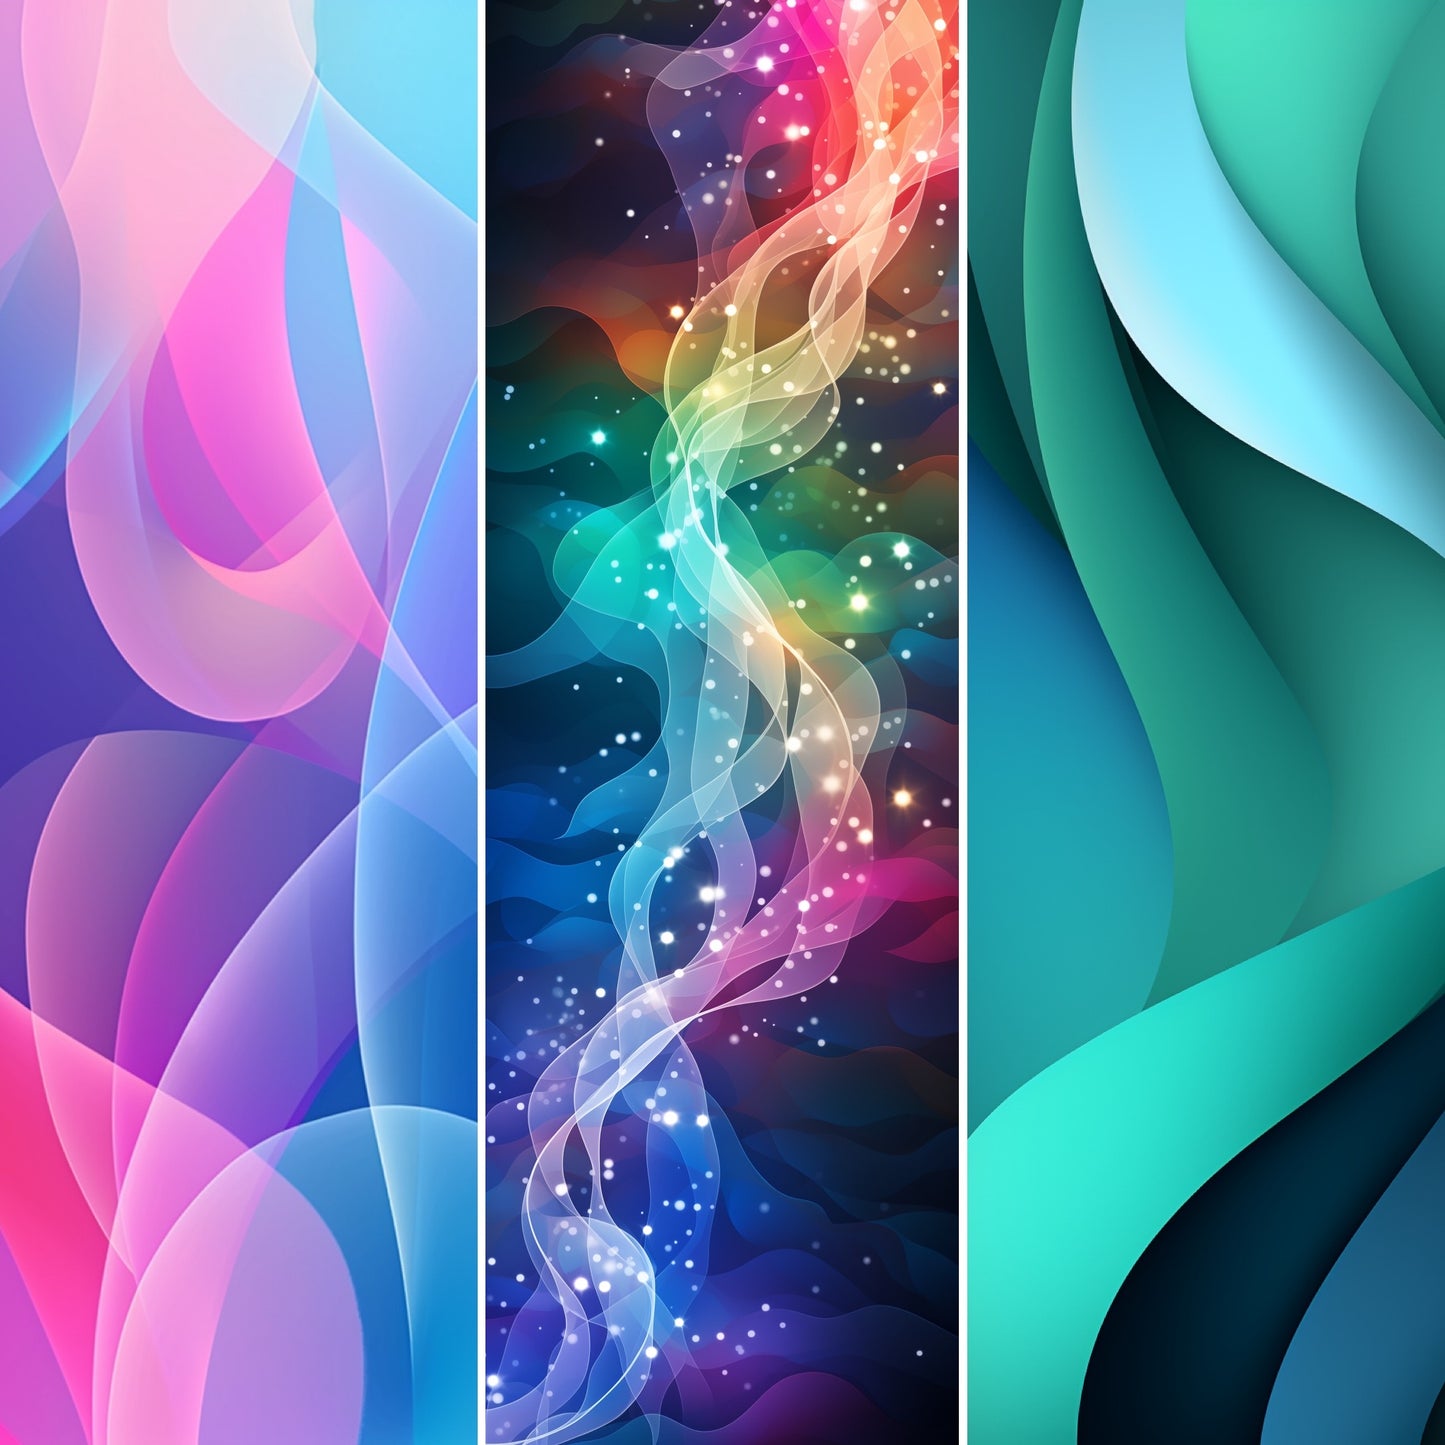 Prism Dreams: Dark Patterns of Colorful Bliss Wallpaper Pack